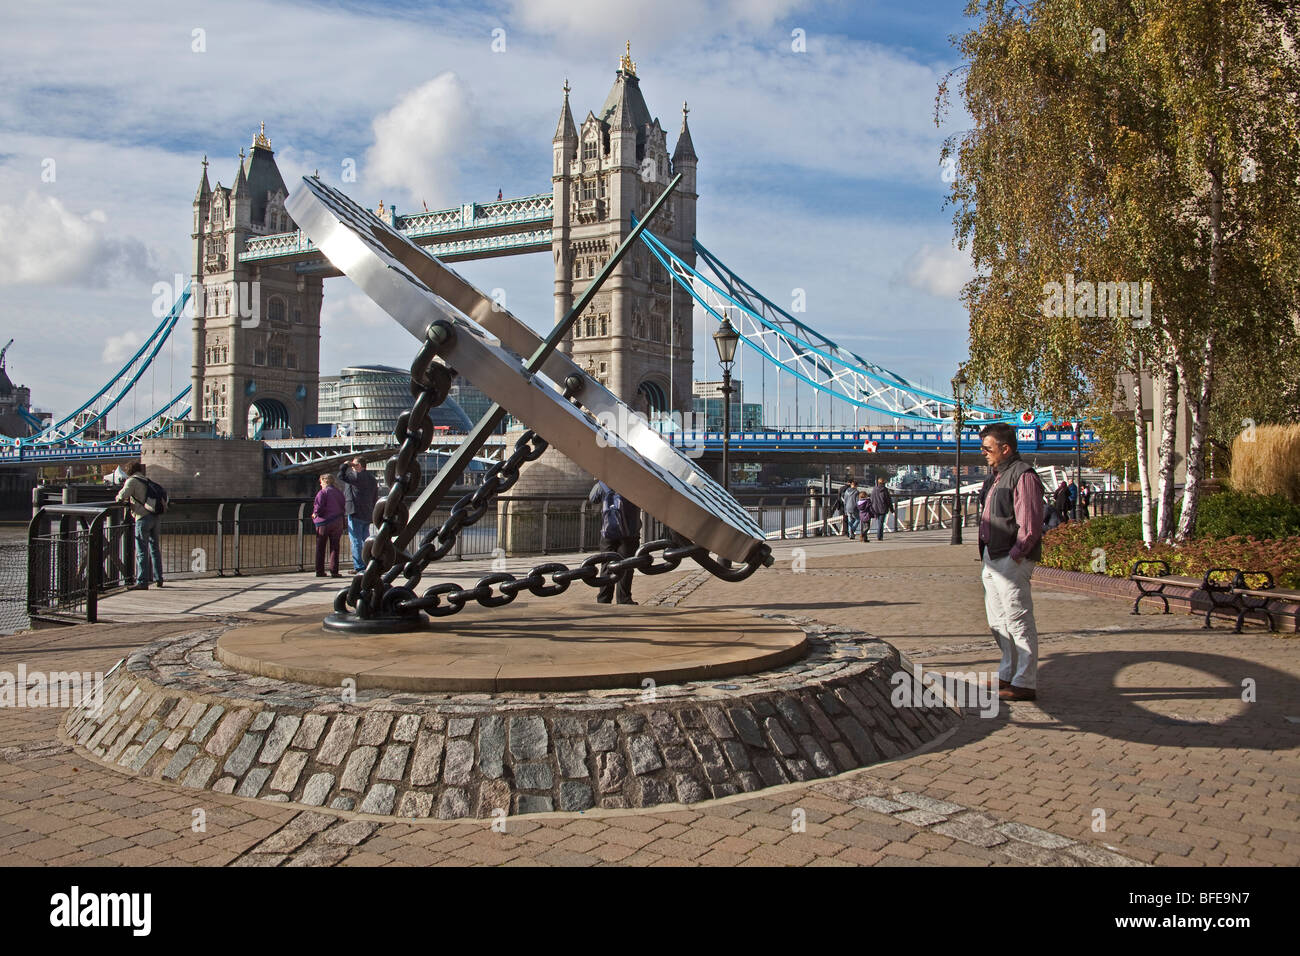 London ; St Katharine's Dock ; Sundial by Wendy Taylor, 1973 ; October 2OO9 Stock Photo